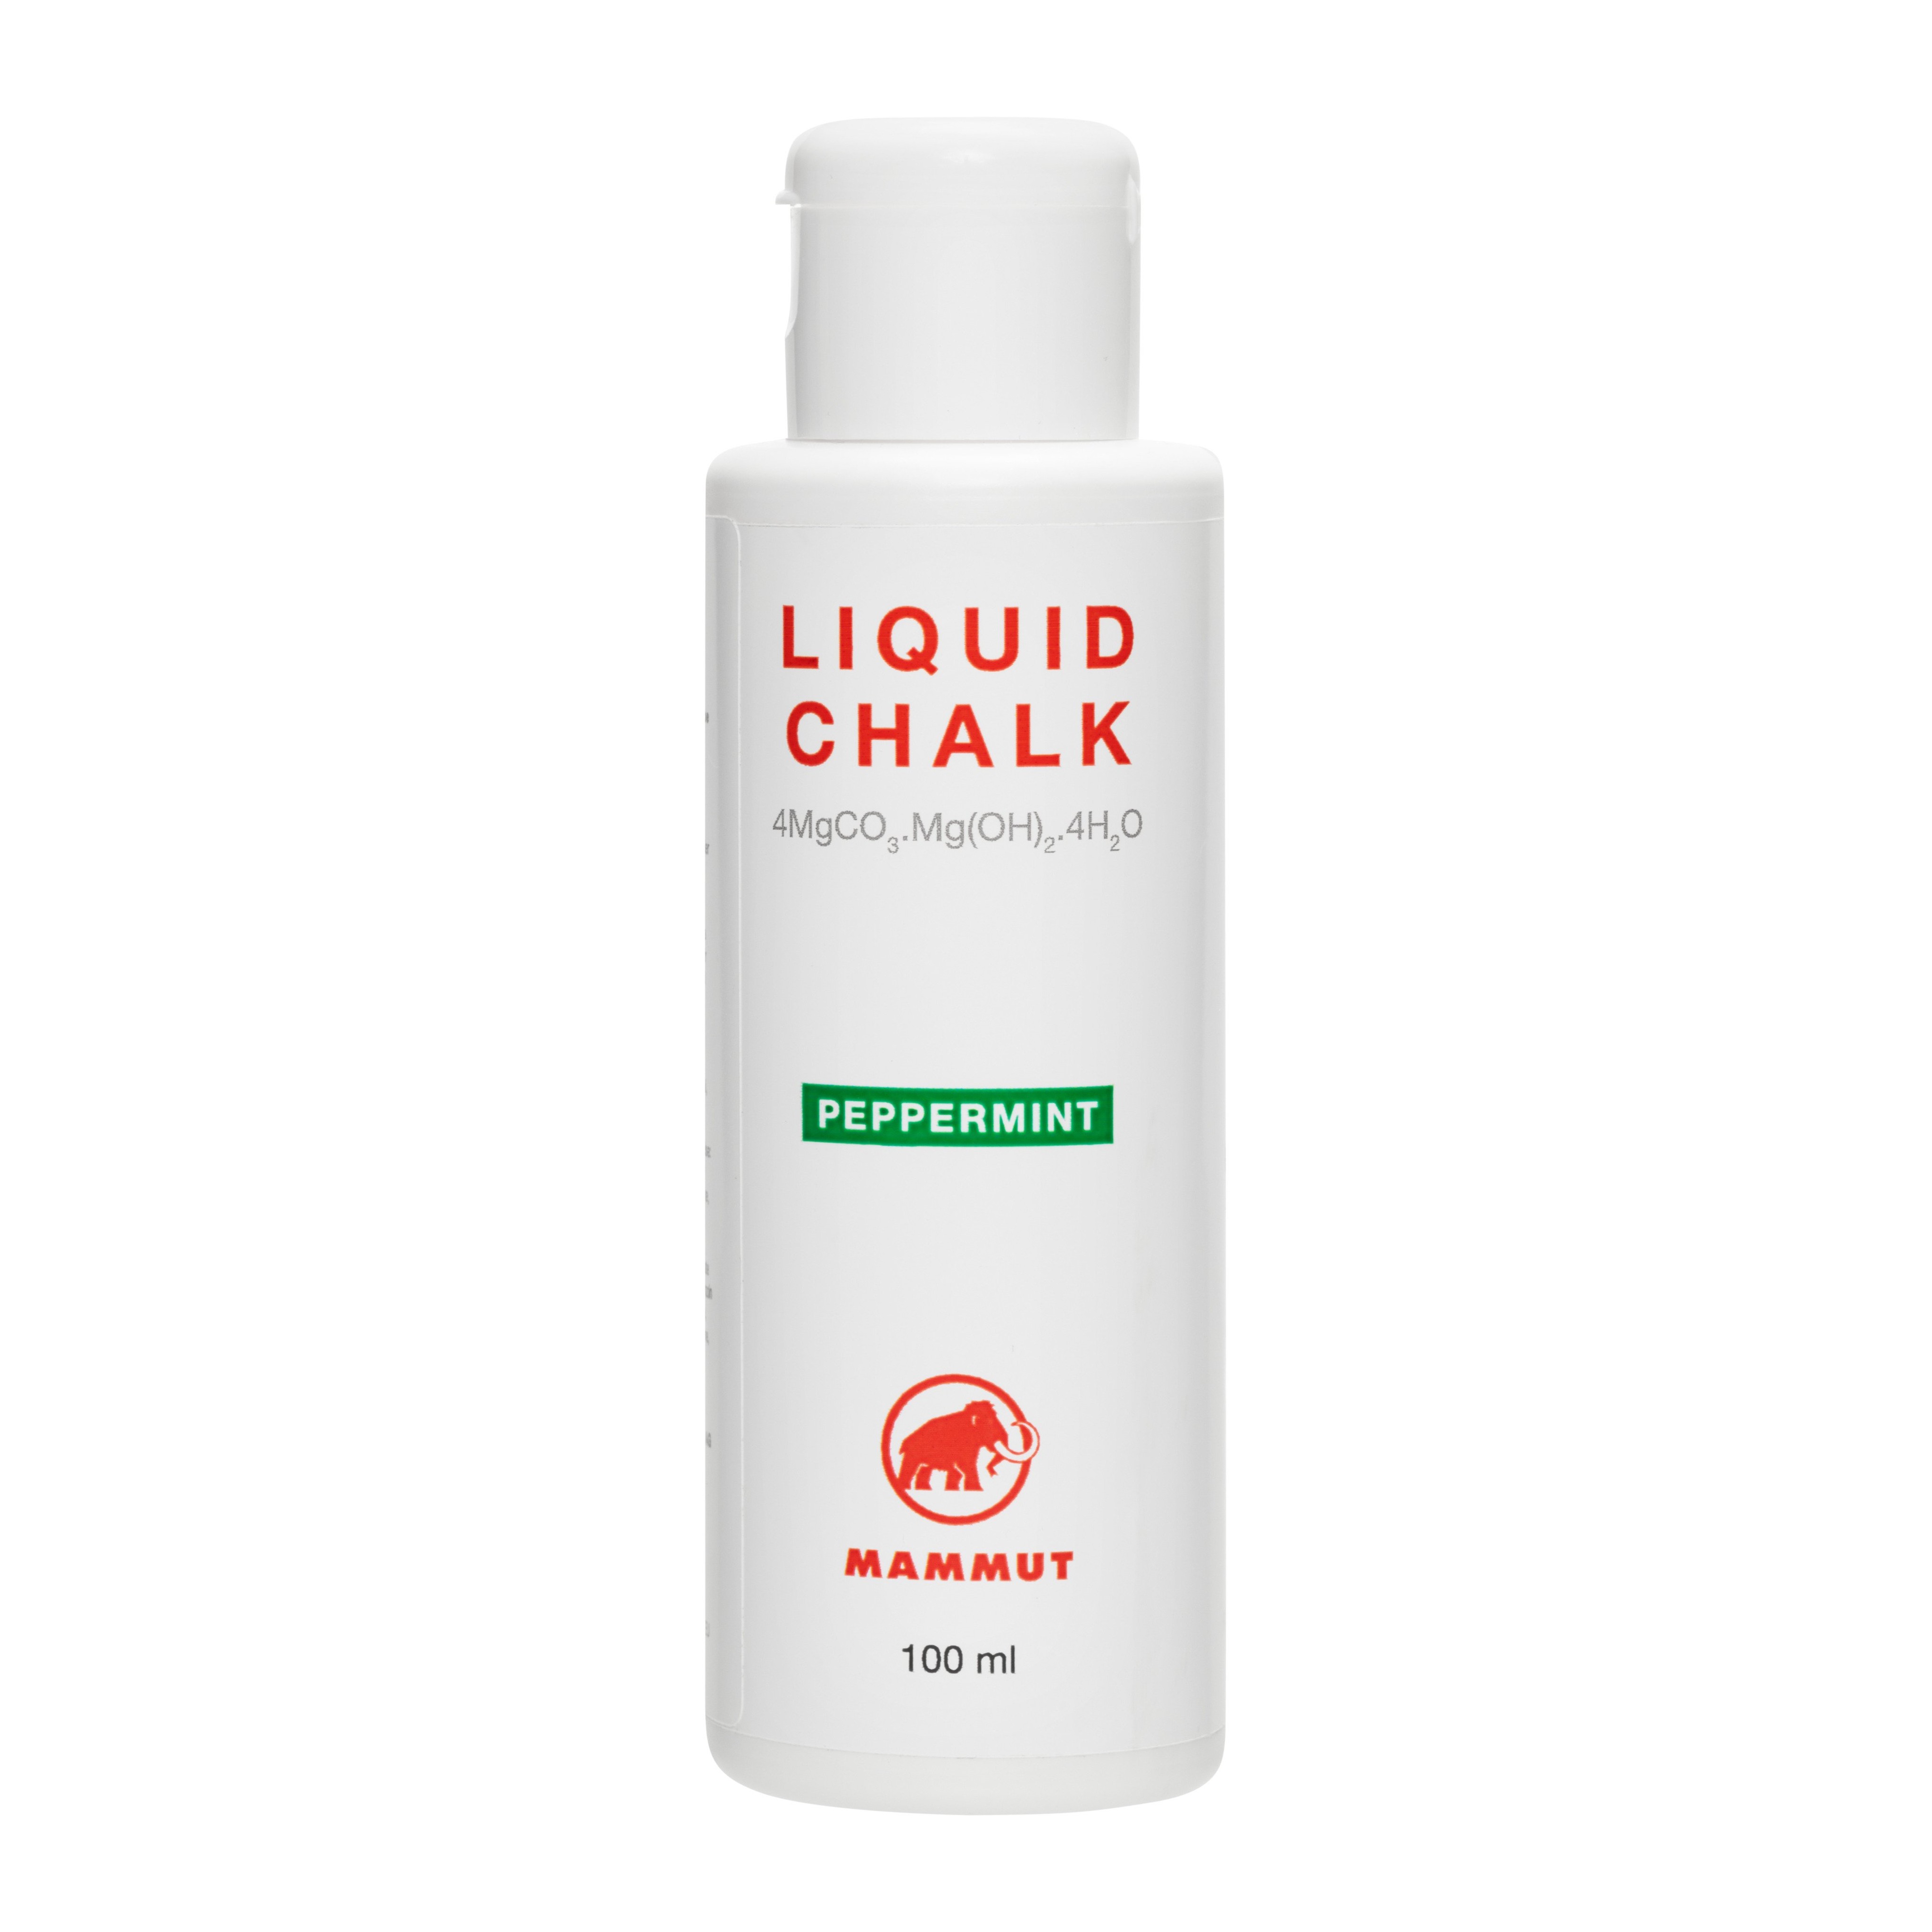 Liquid Chalk Peppermint 100 ml - neutral, one size product image